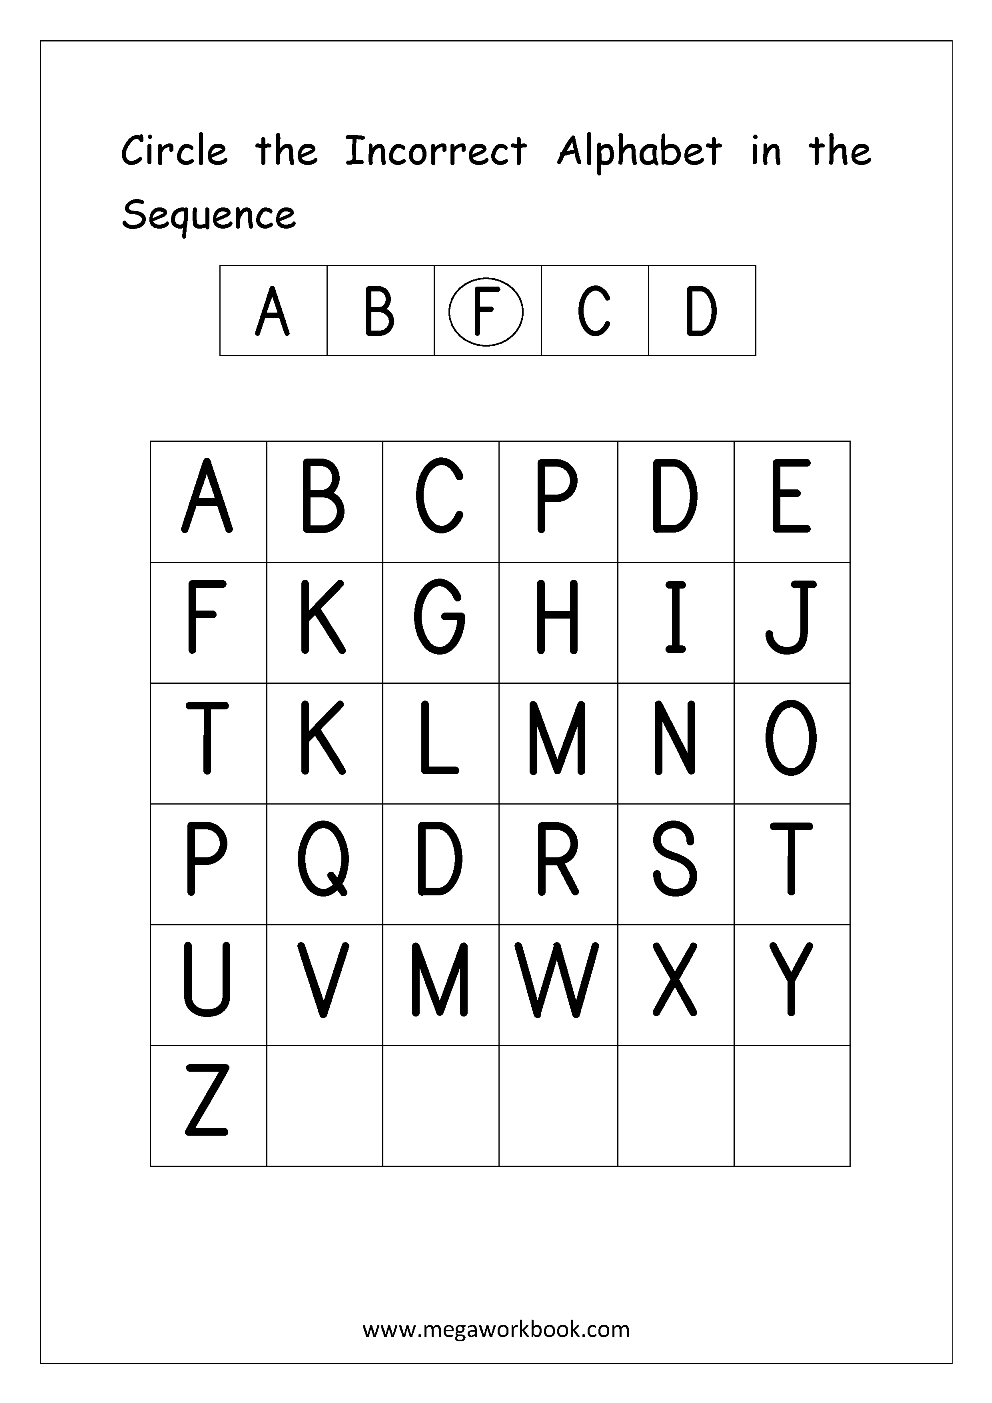 Alphabet Sequence Worksheets